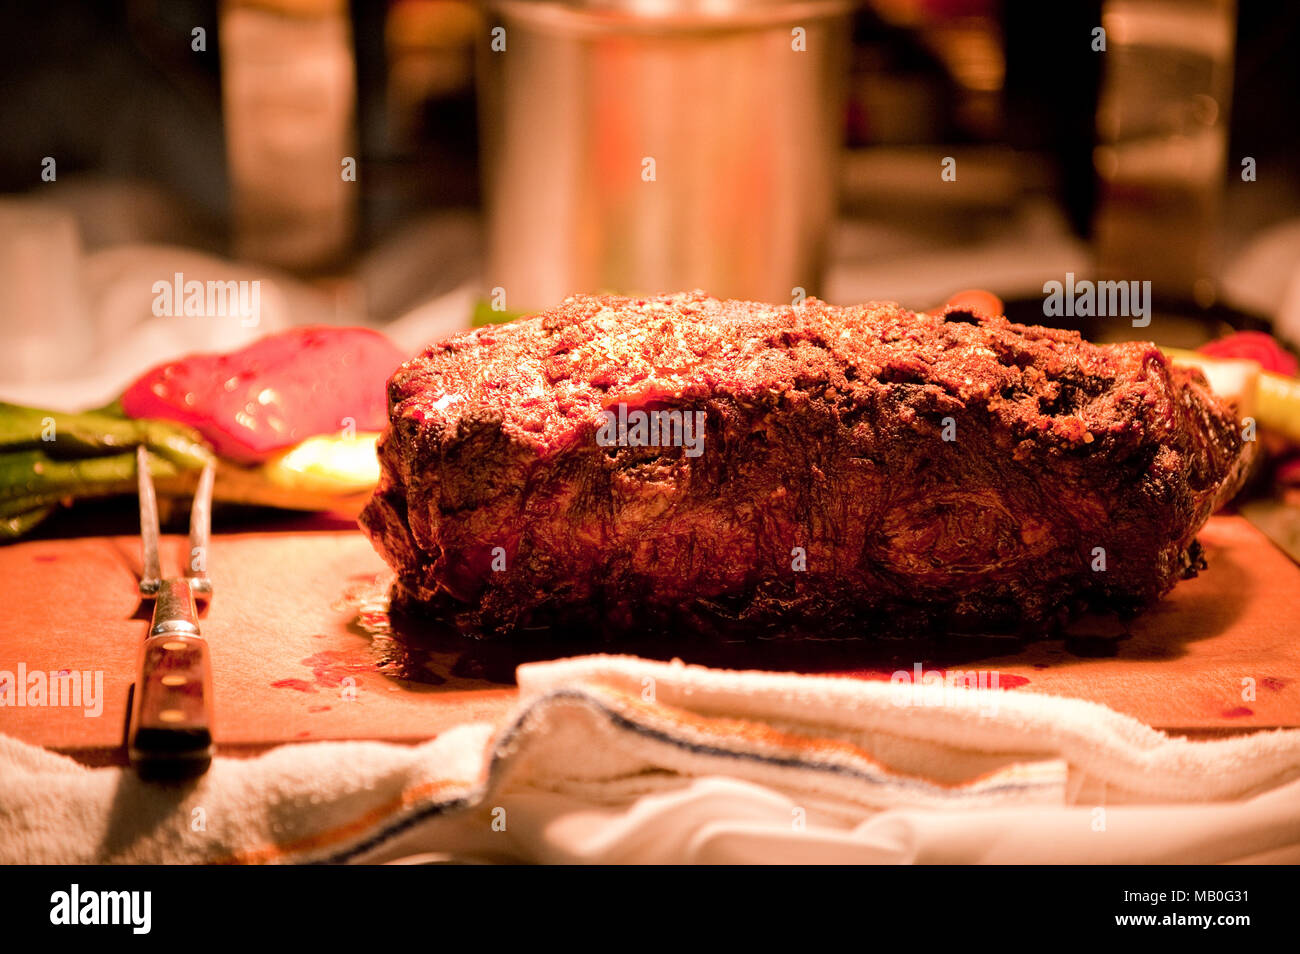 A big piece of steak on a cutting board ready to be served at a party Stock Photo